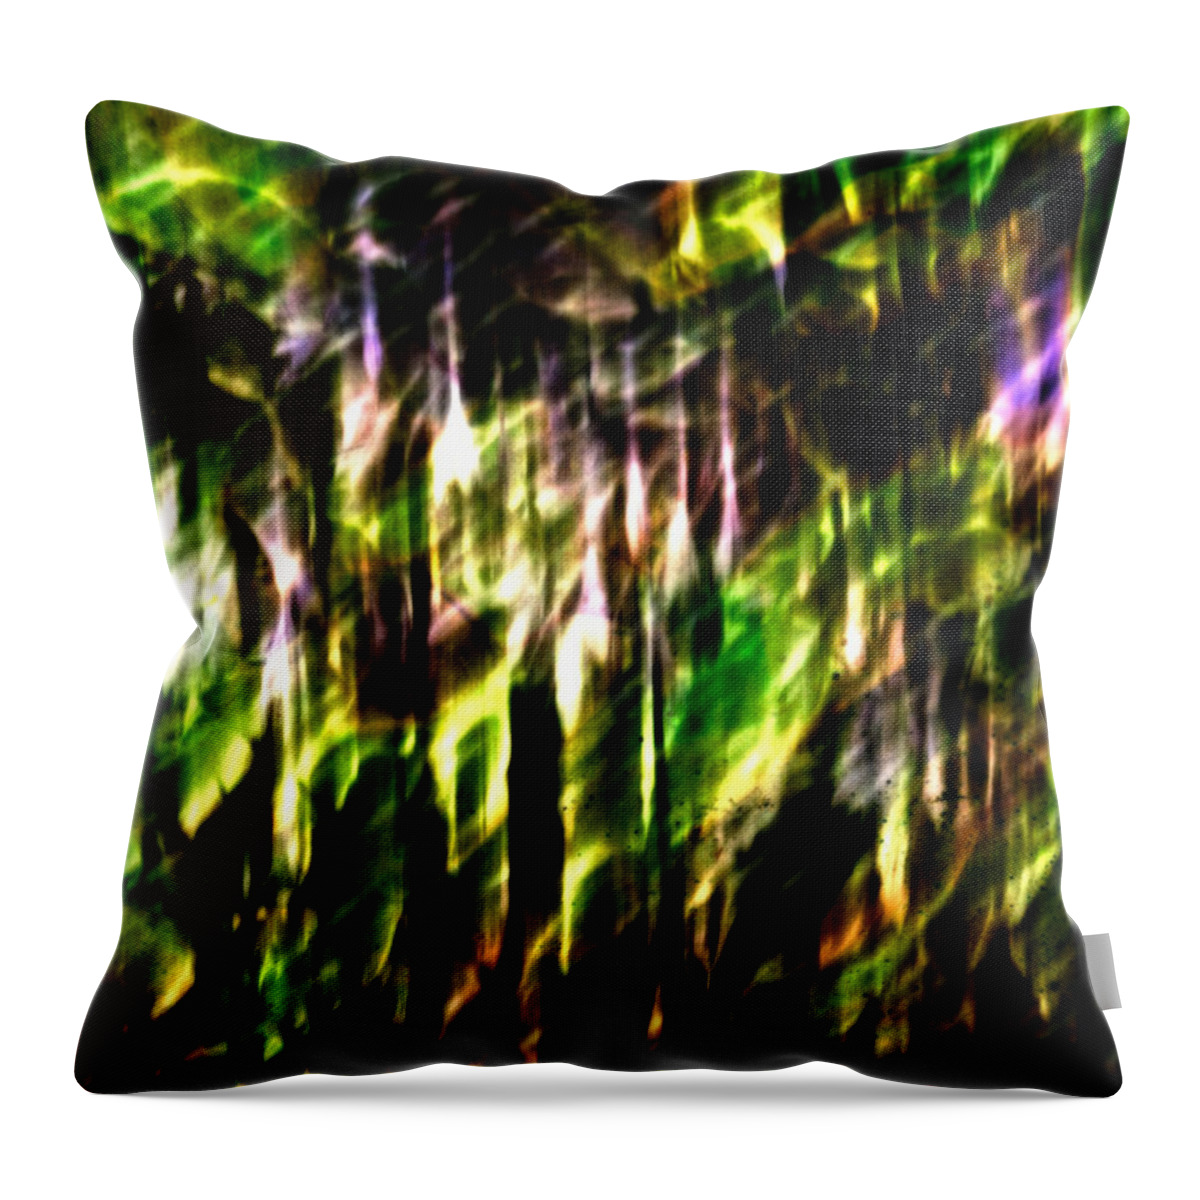 Abstract Throw Pillow featuring the photograph Abscond Squall by Scott Wyatt